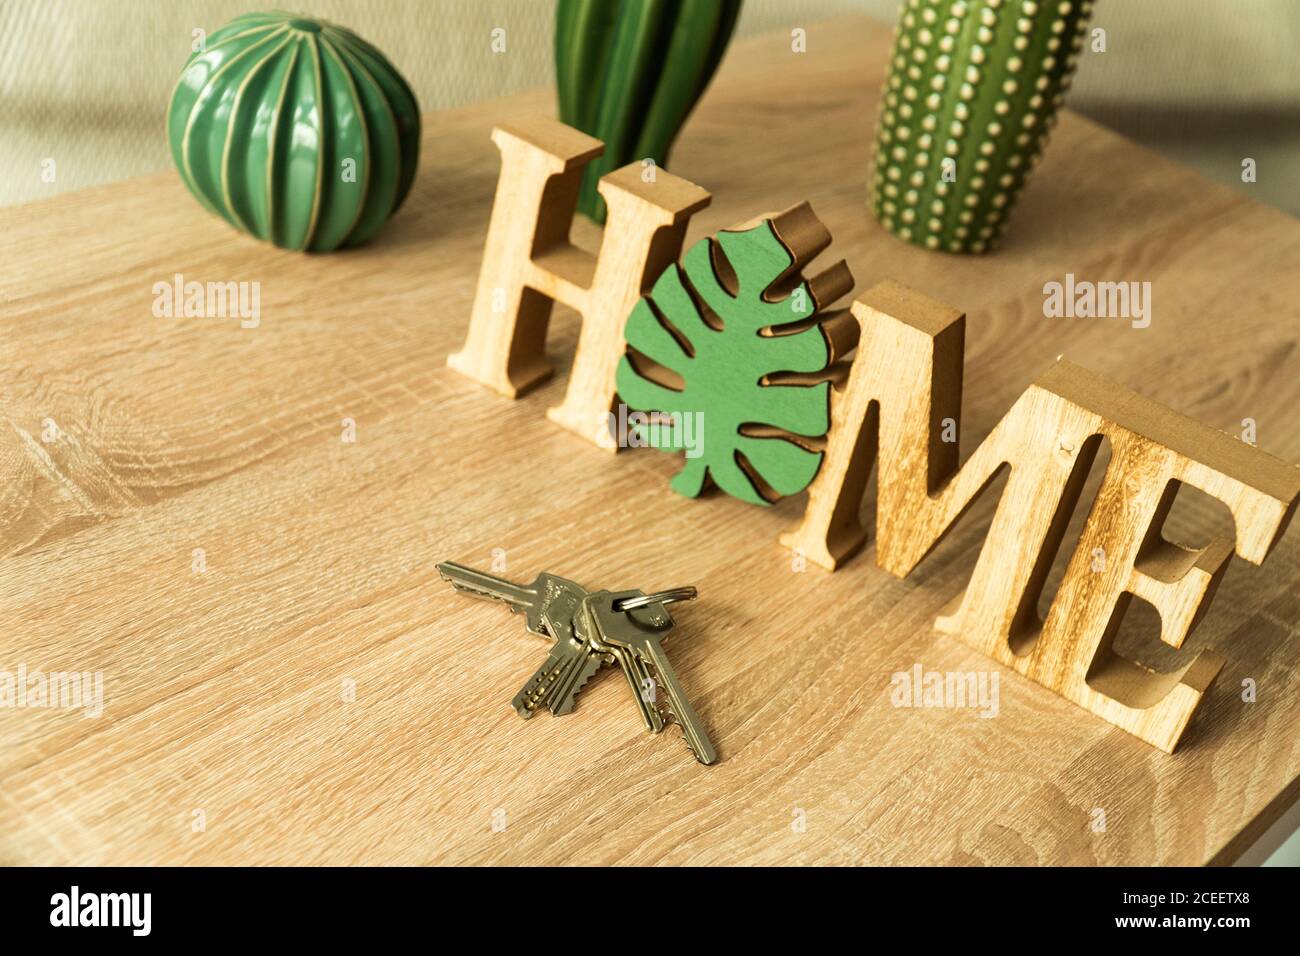 Keys on the table with some ornaments on the back where you can read home and see some cacti Stock Photo